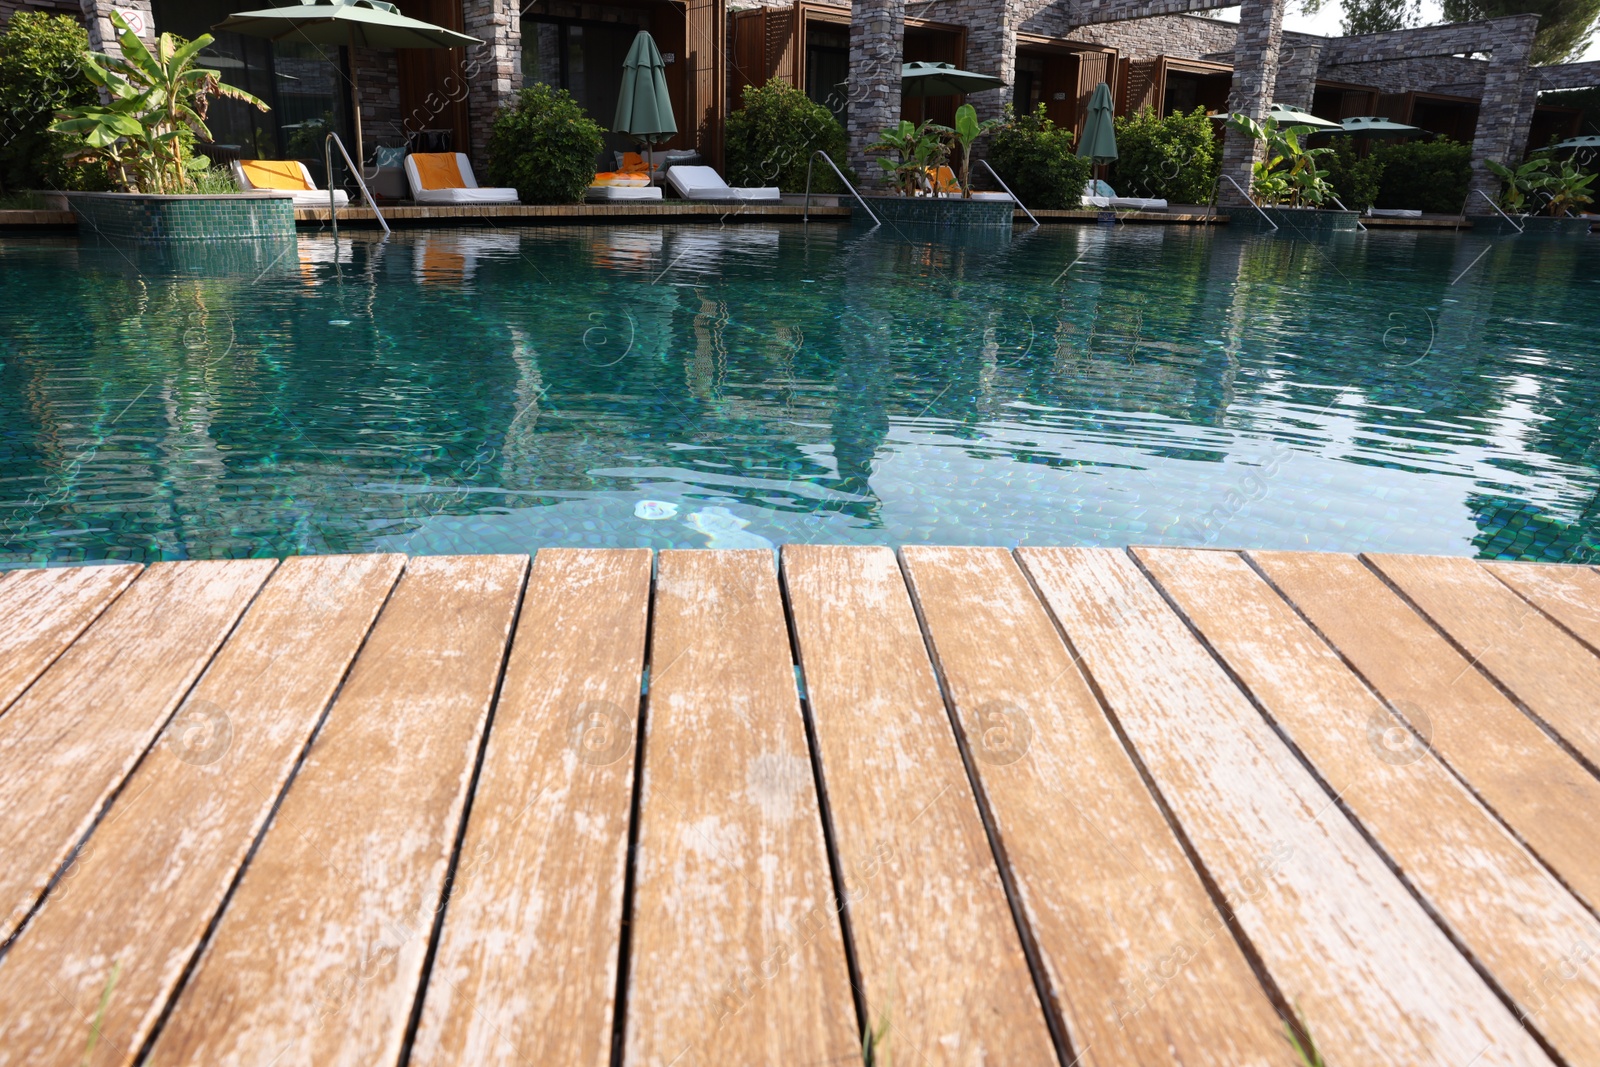 Photo of Wooden deck, swimming pool and recreational area at luxury resort